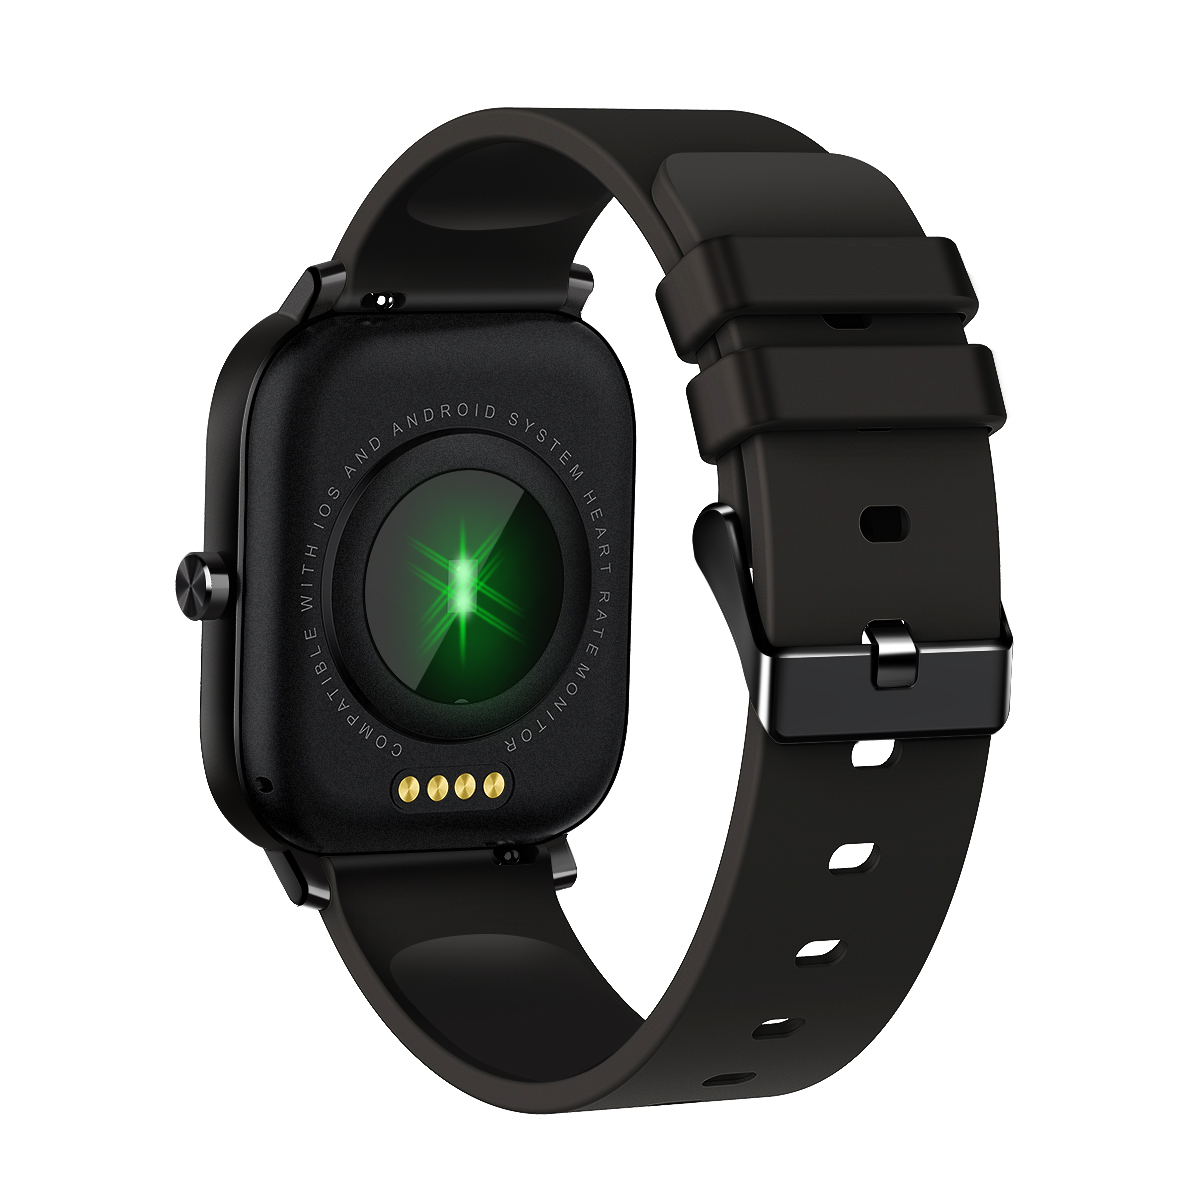 Fashion Low Consumption High Quality Healthy Sleep Monitoring Smart Wristband with Hr/ Bpm K23